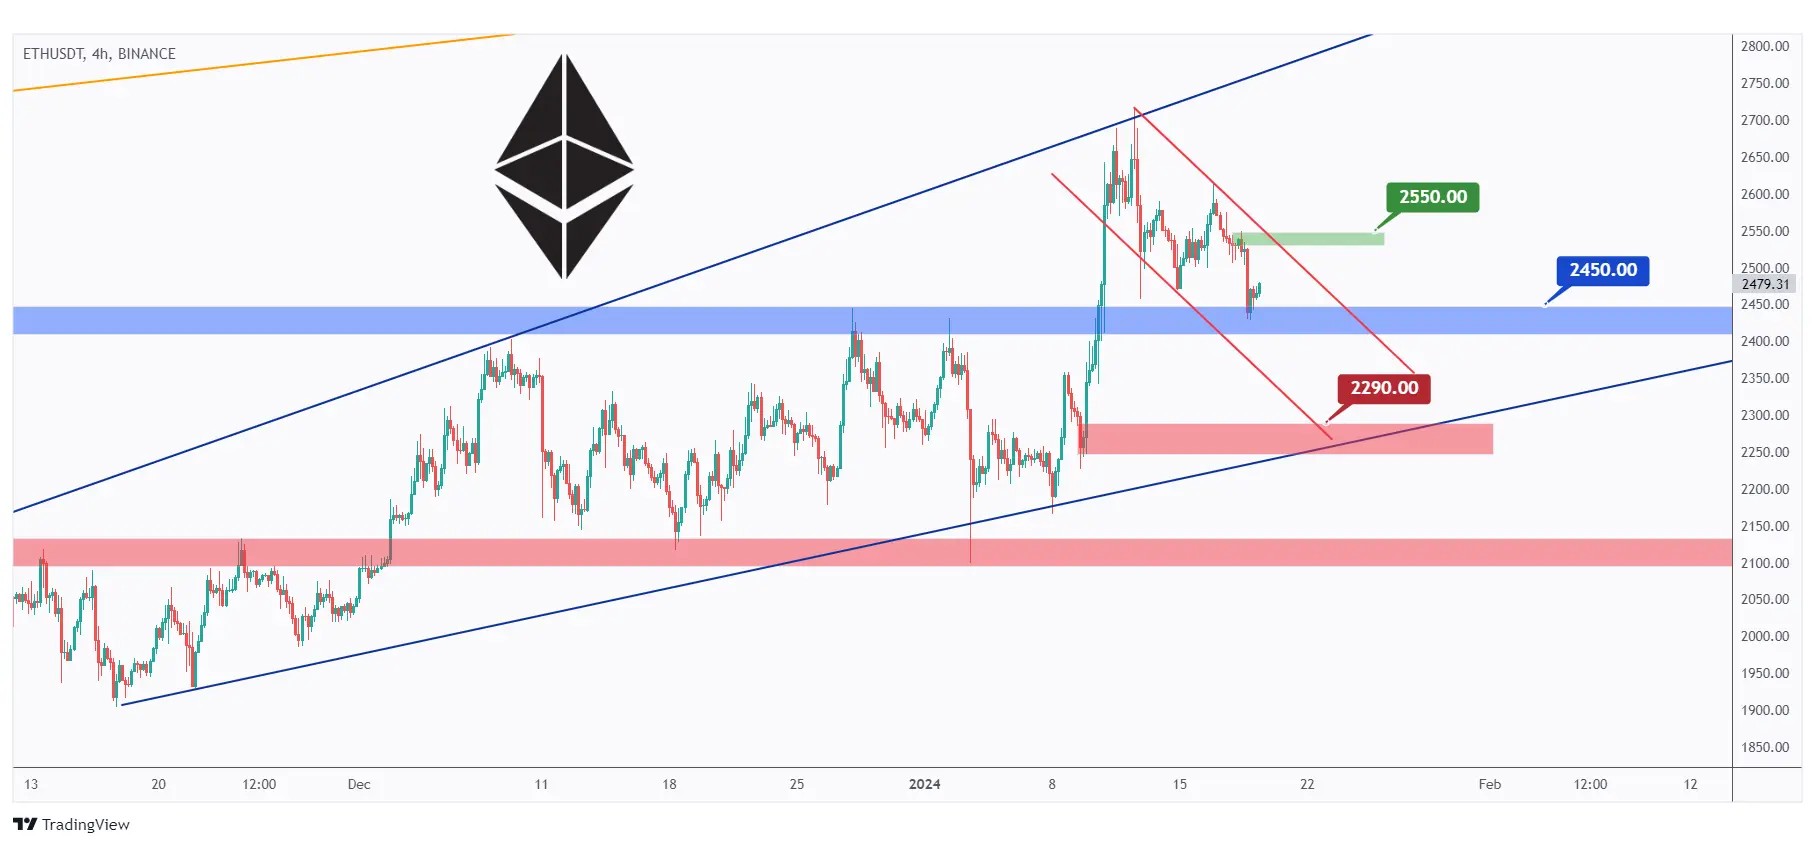 ETH 4H chart shows that it is overall bearish trading inside a falling channel and approaching a robust support.